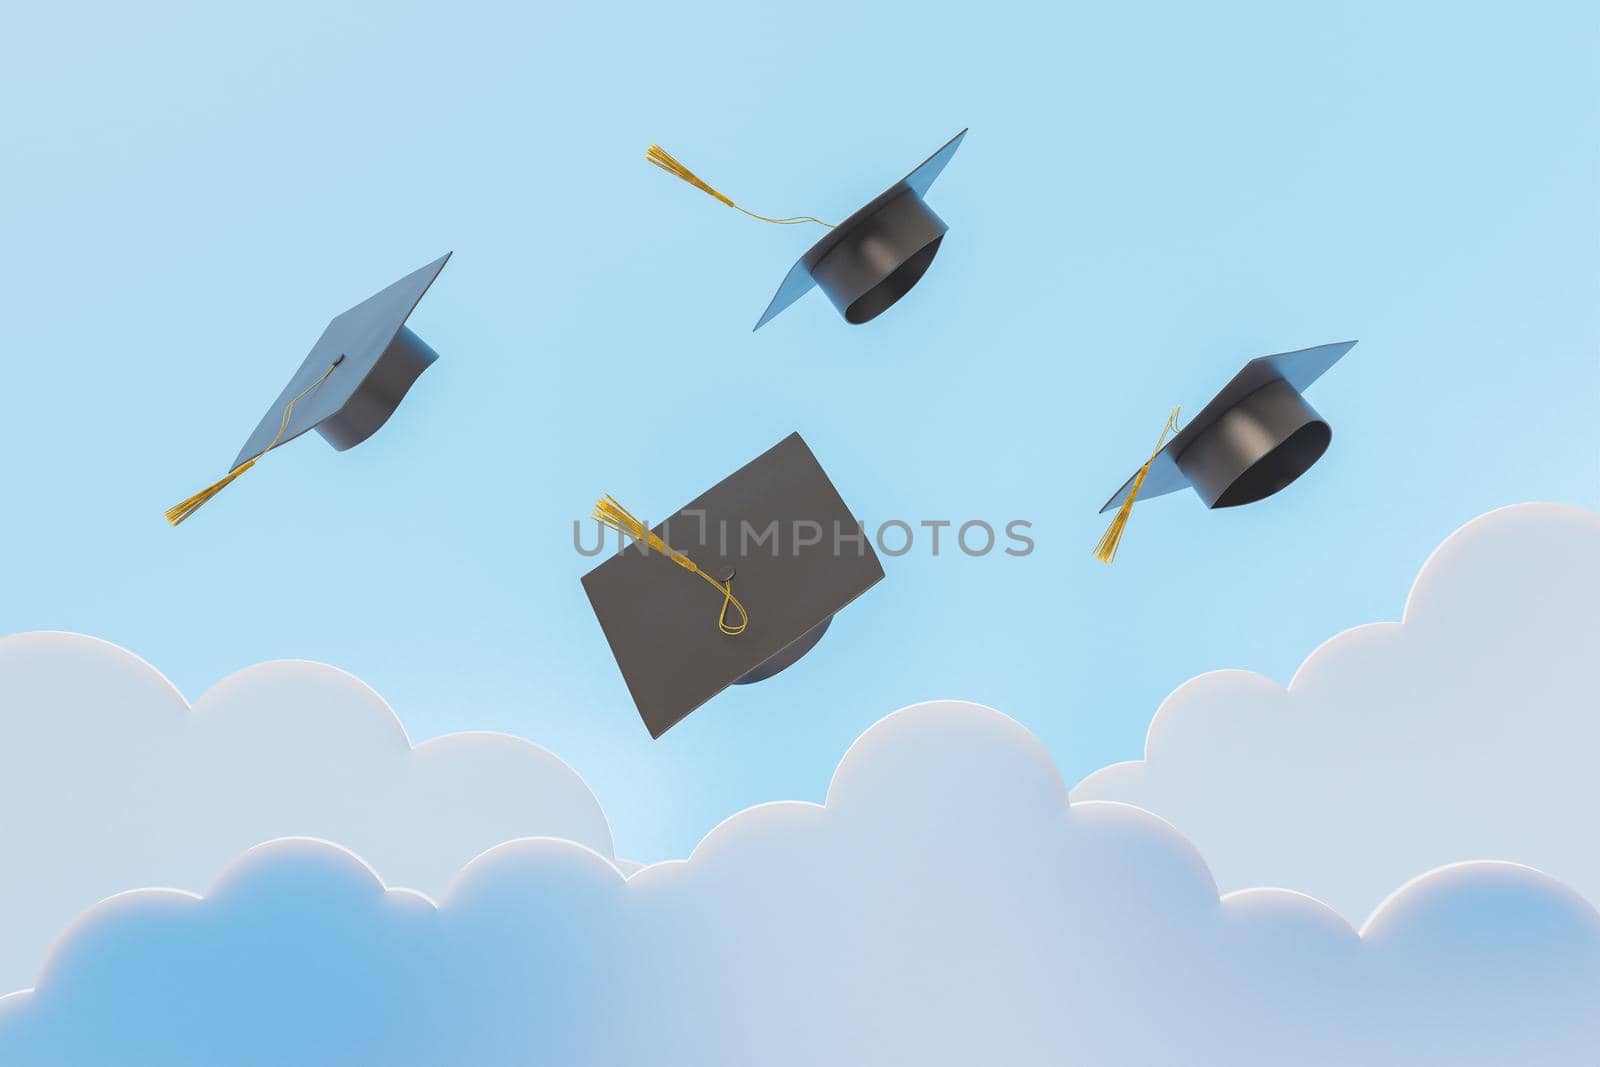 3d illustration of group of graduation hats tossed up together in blue sky with clouds